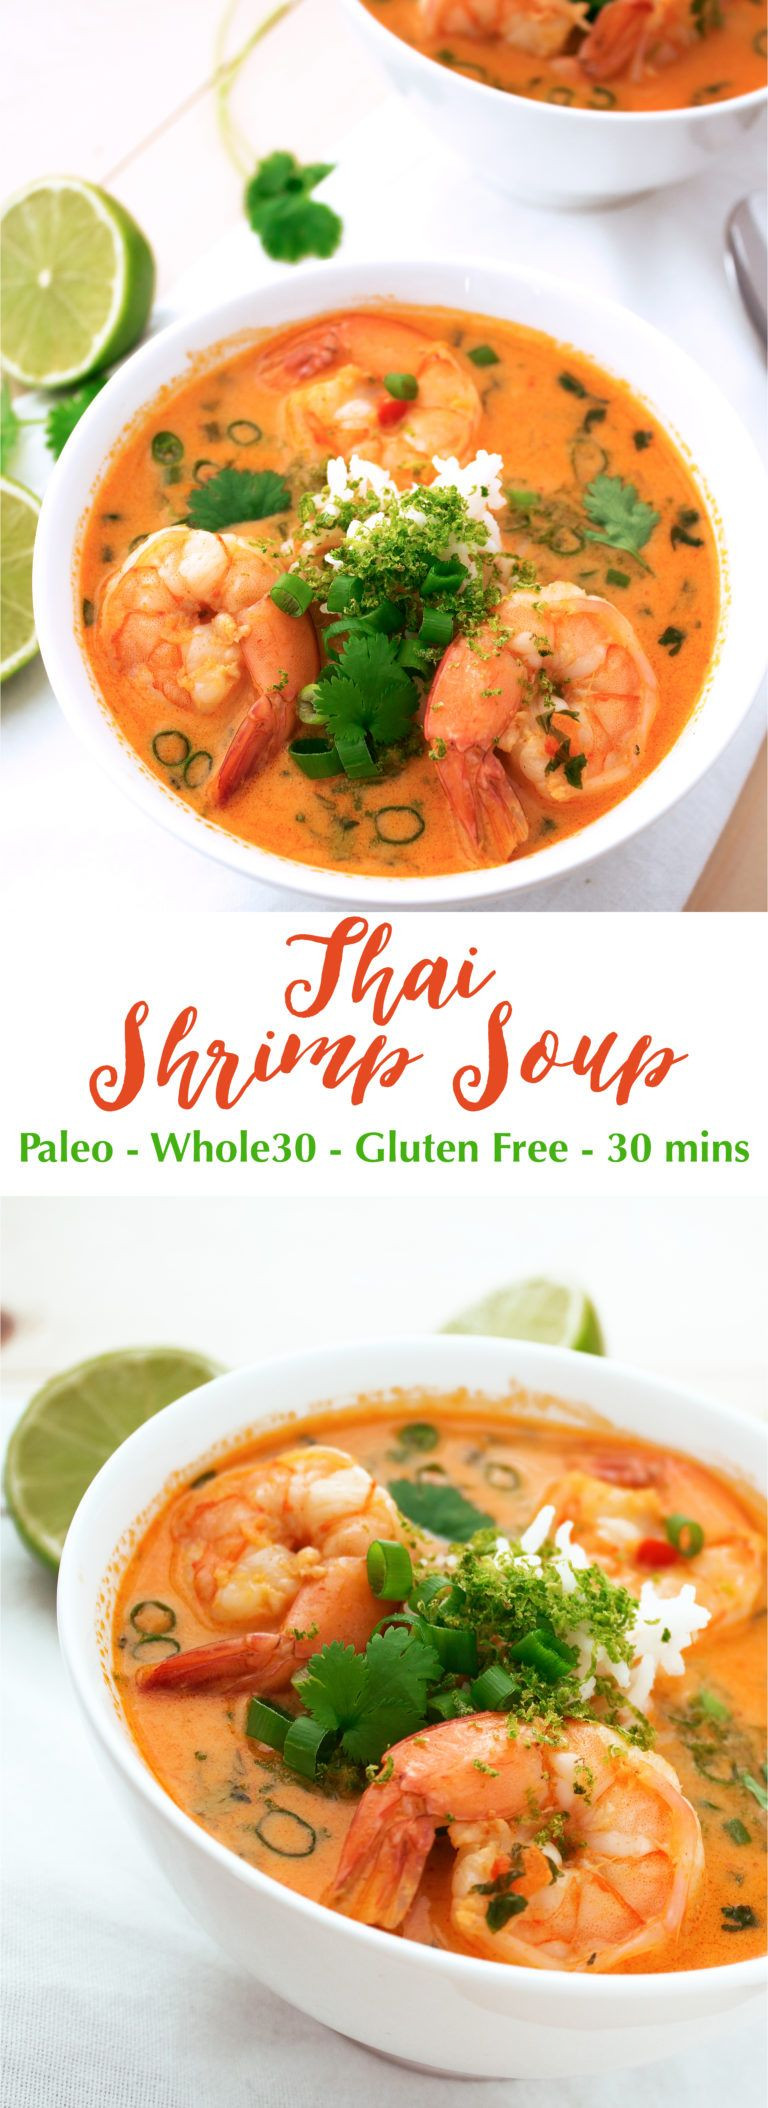 Easy Thai Shrimp Soup
 This delicious soup is easy to make and only takes 30 mins